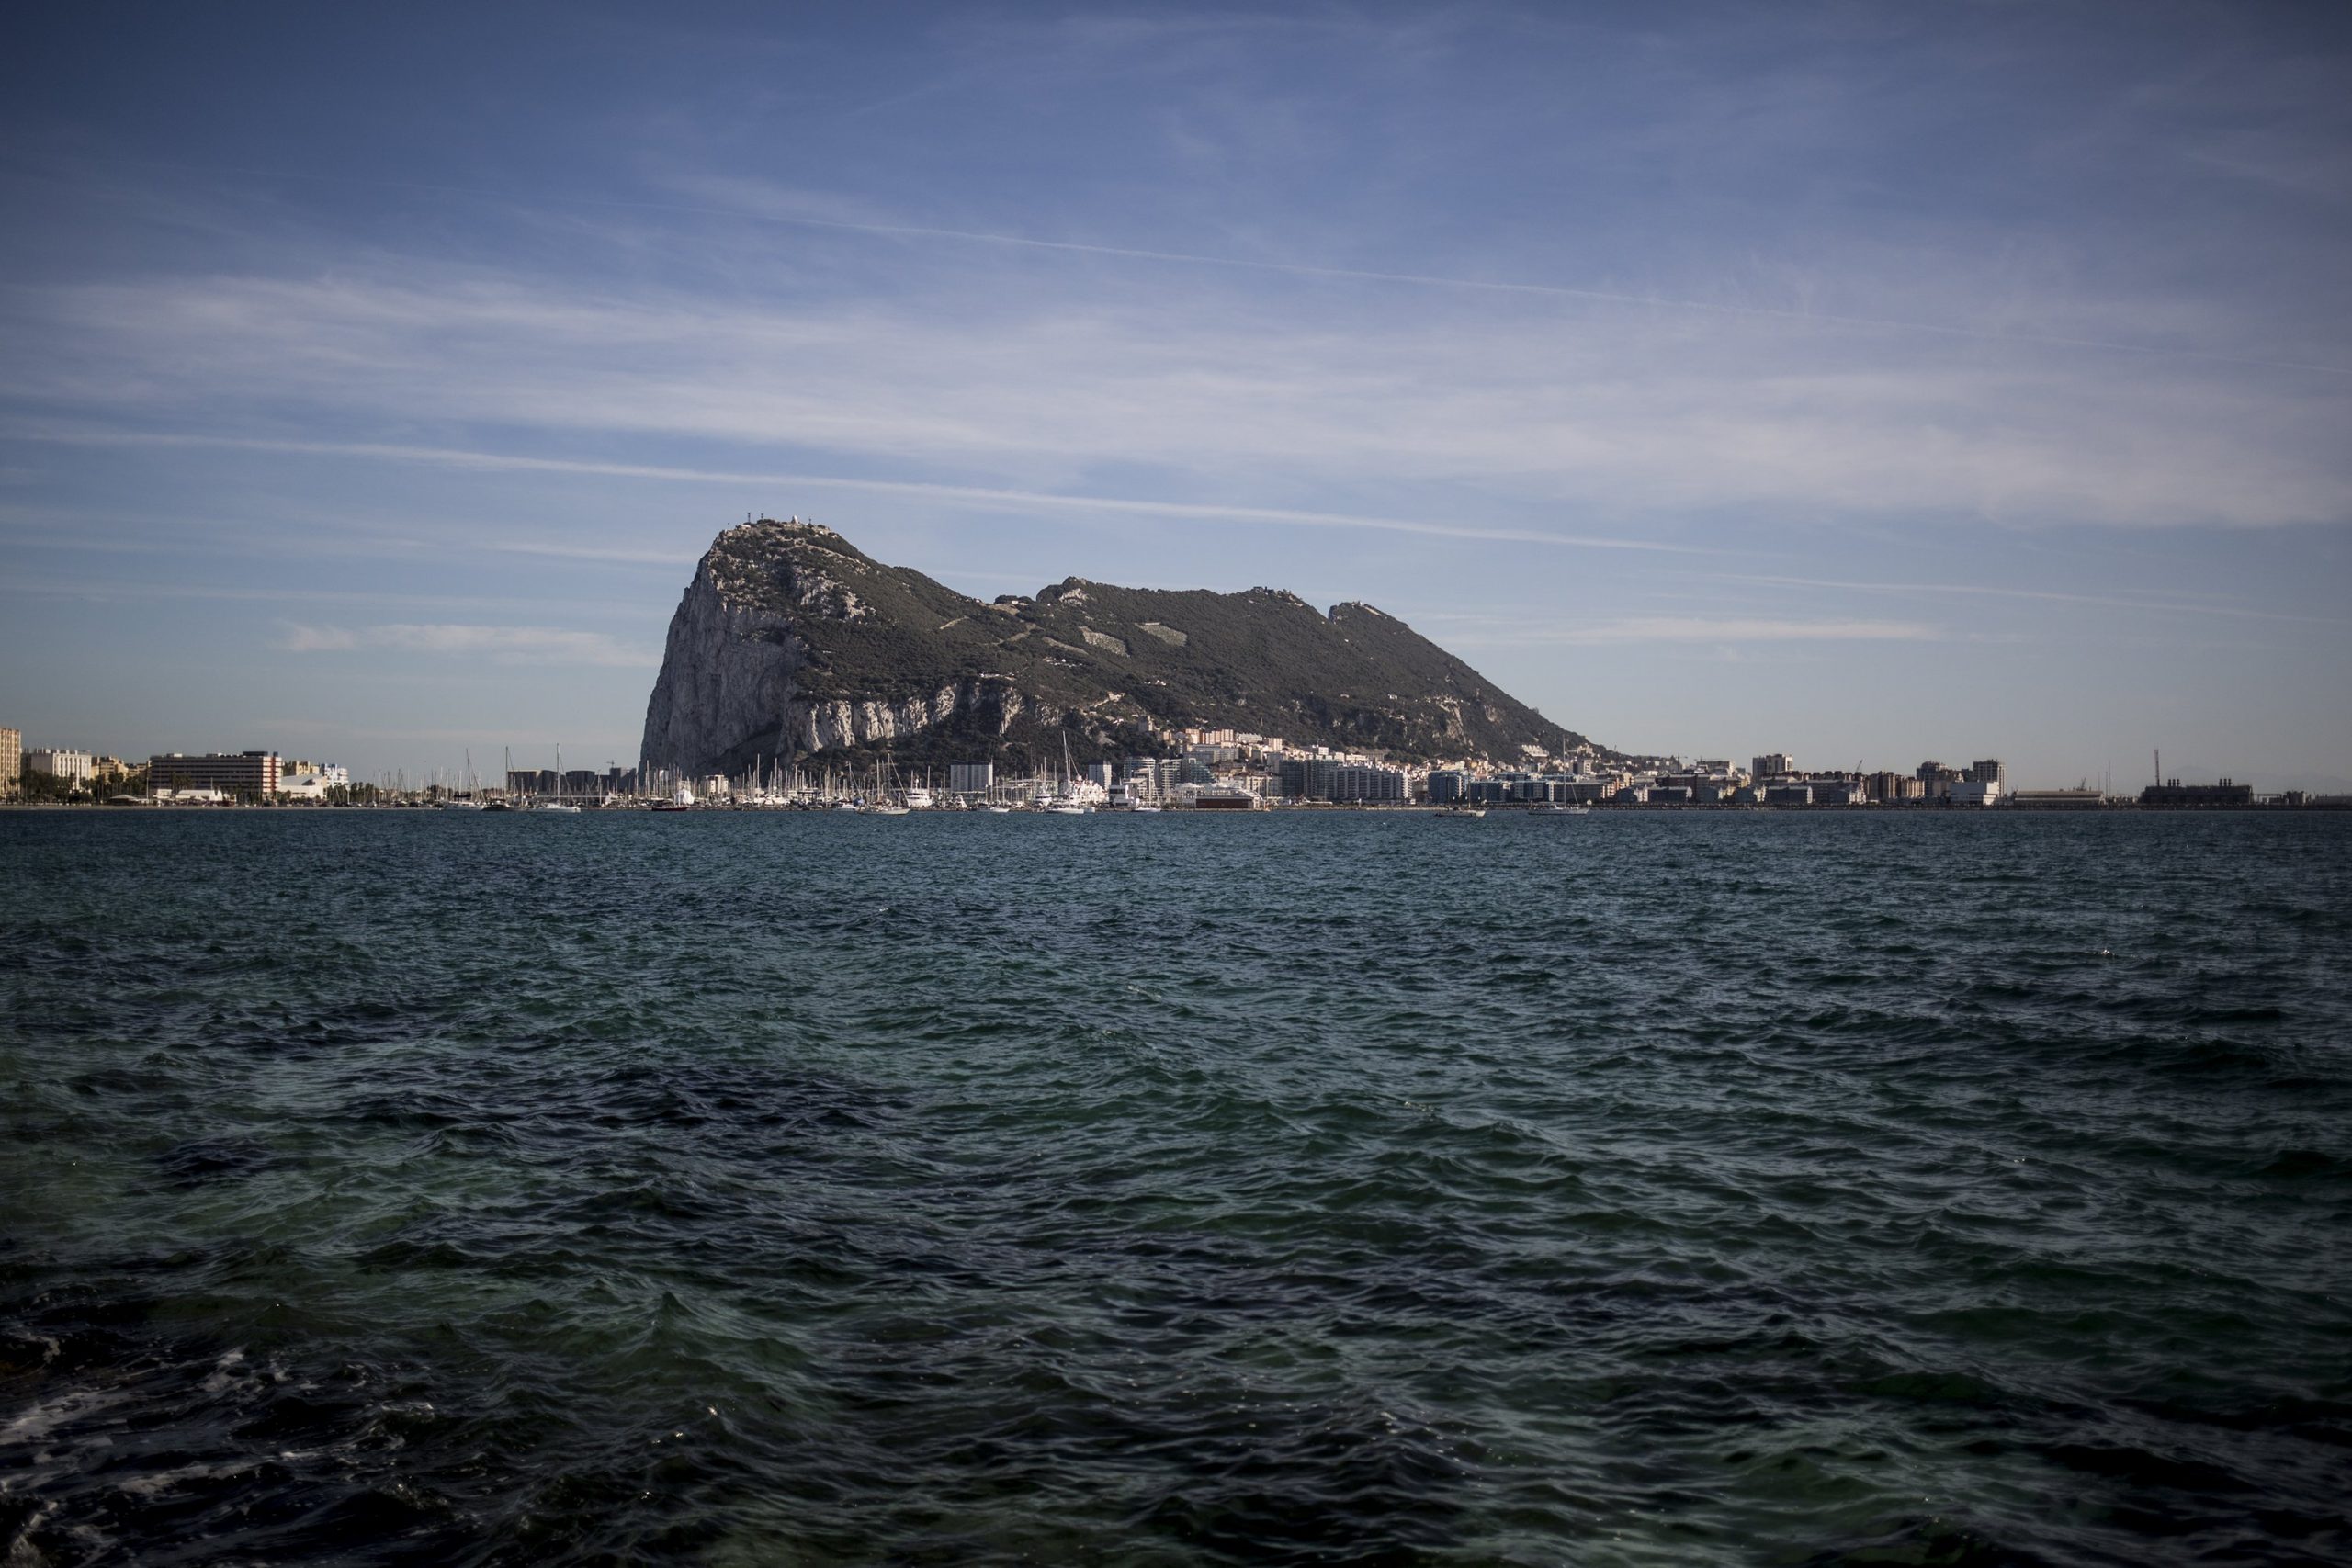 Gibraltar’s borders with Spain are still in doubt after Brexit